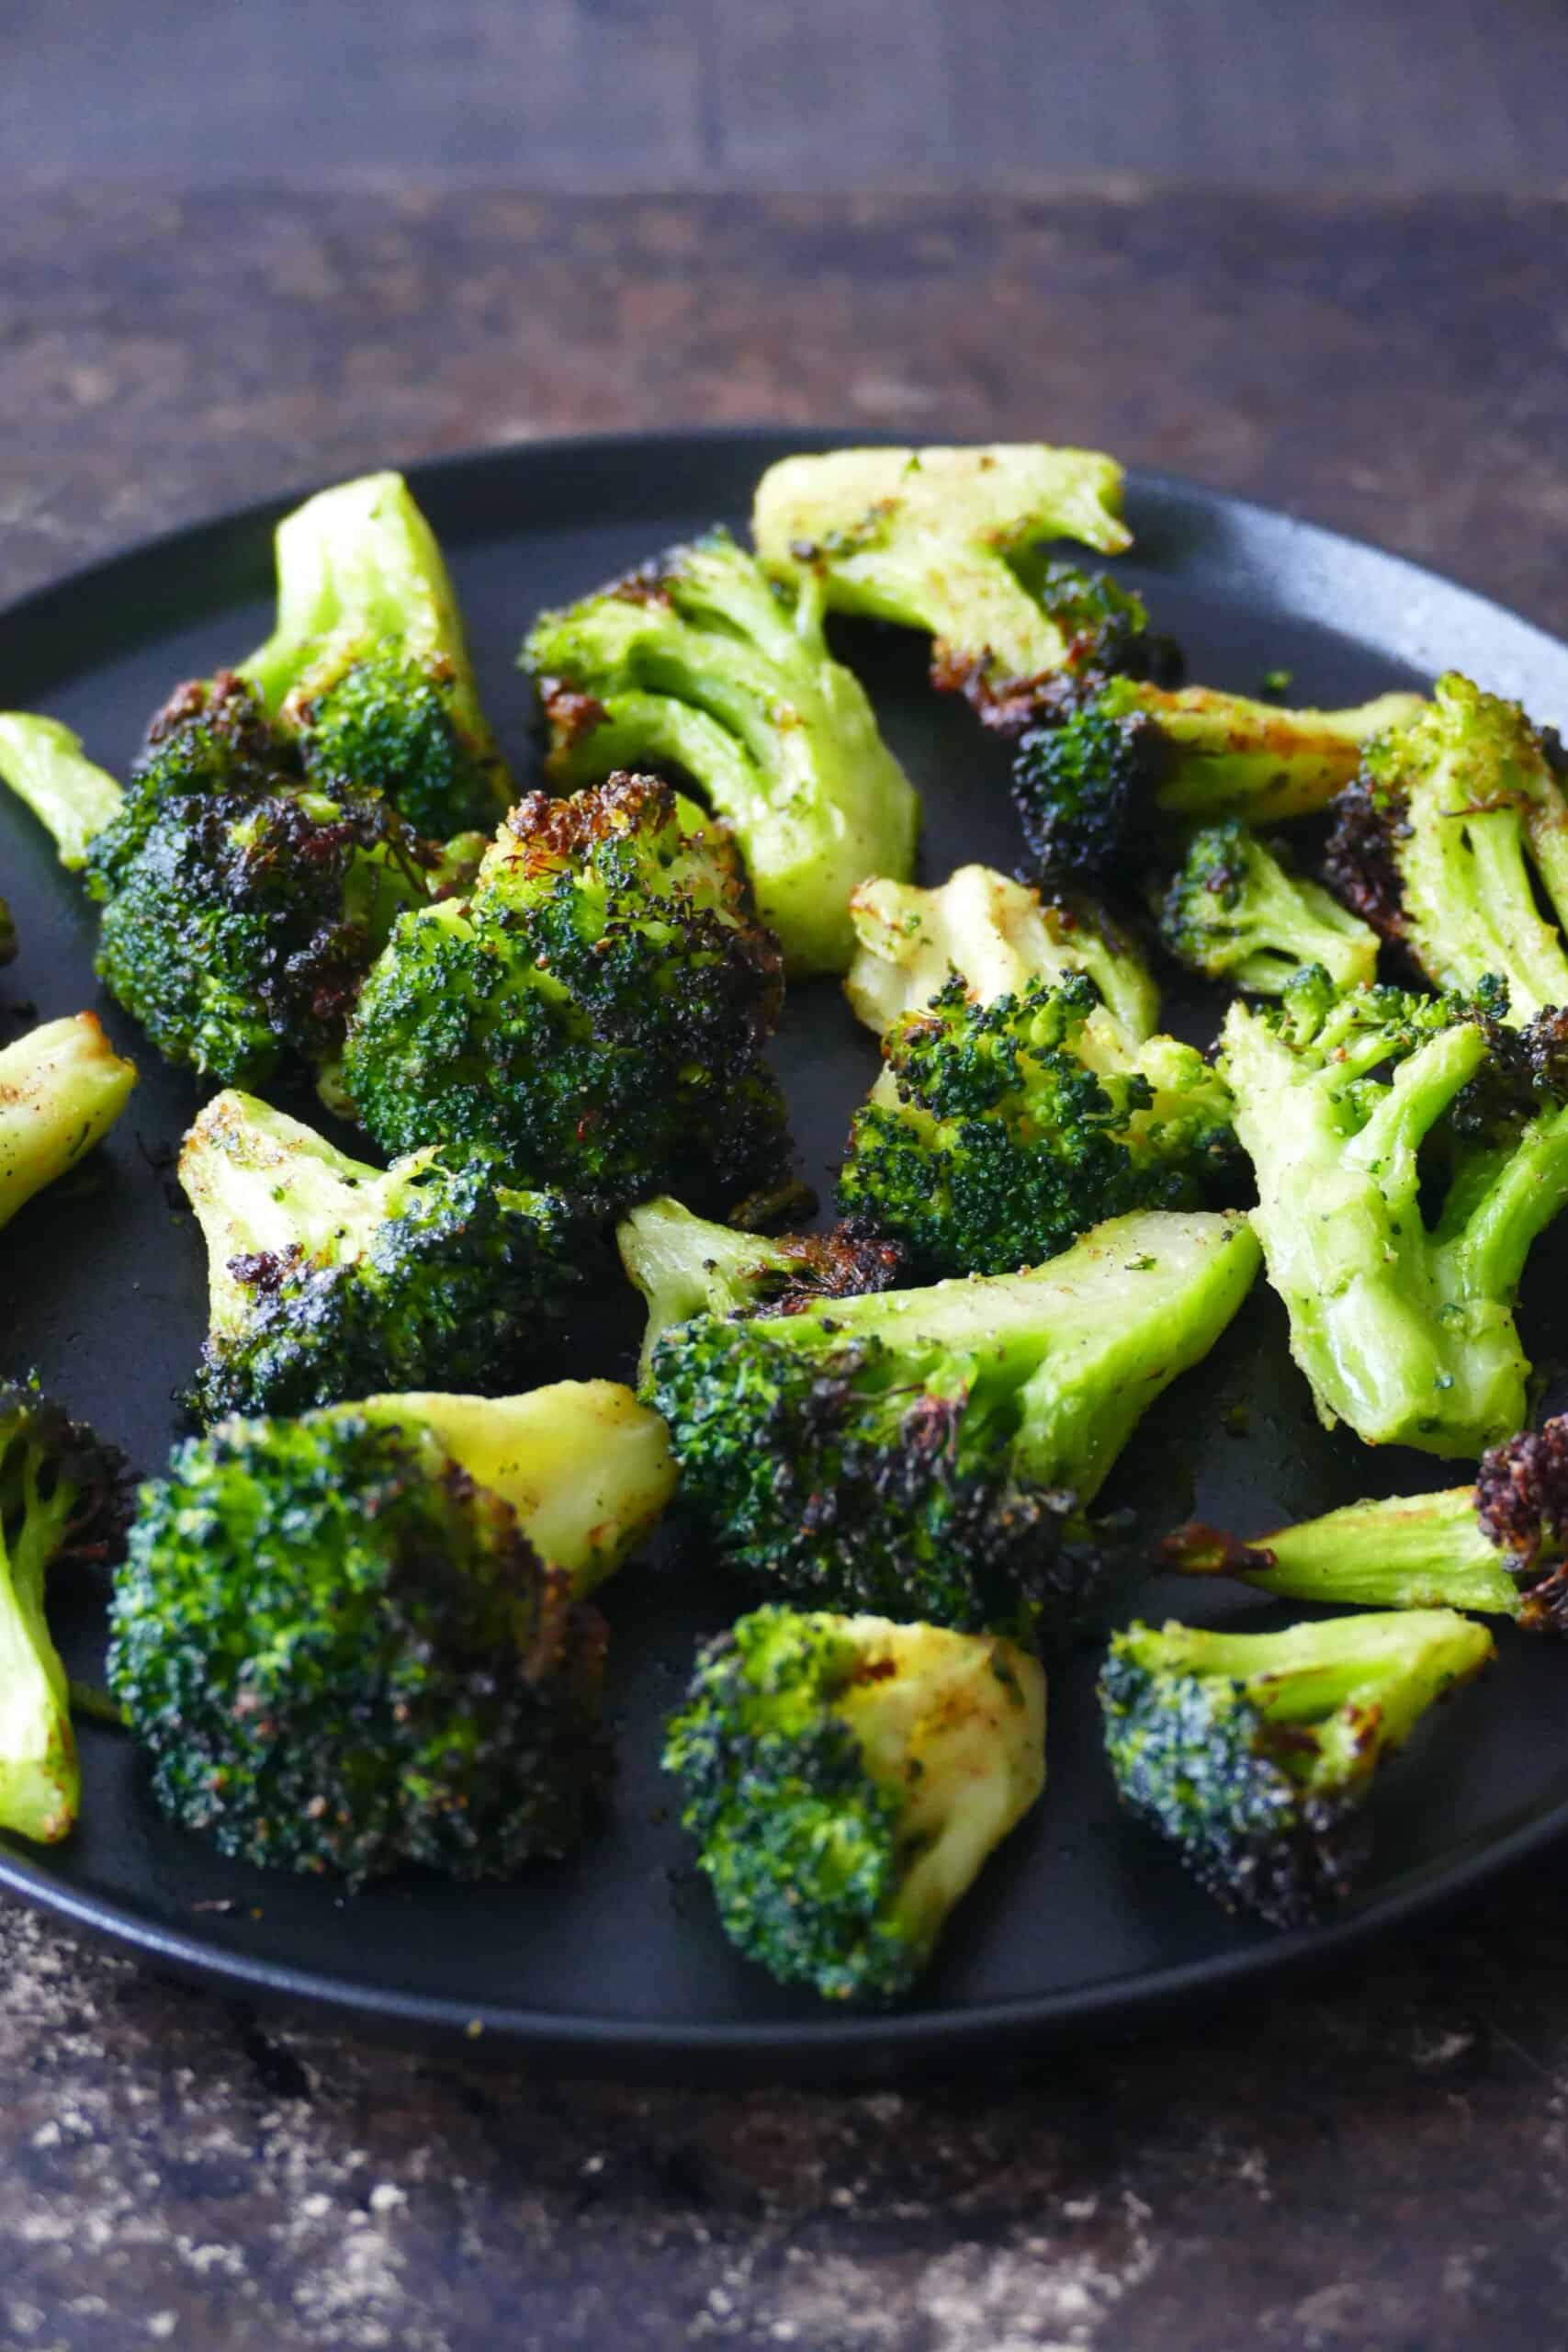 Air fryer frozen broccoli - Black plate with slightly charred broccoli florets.